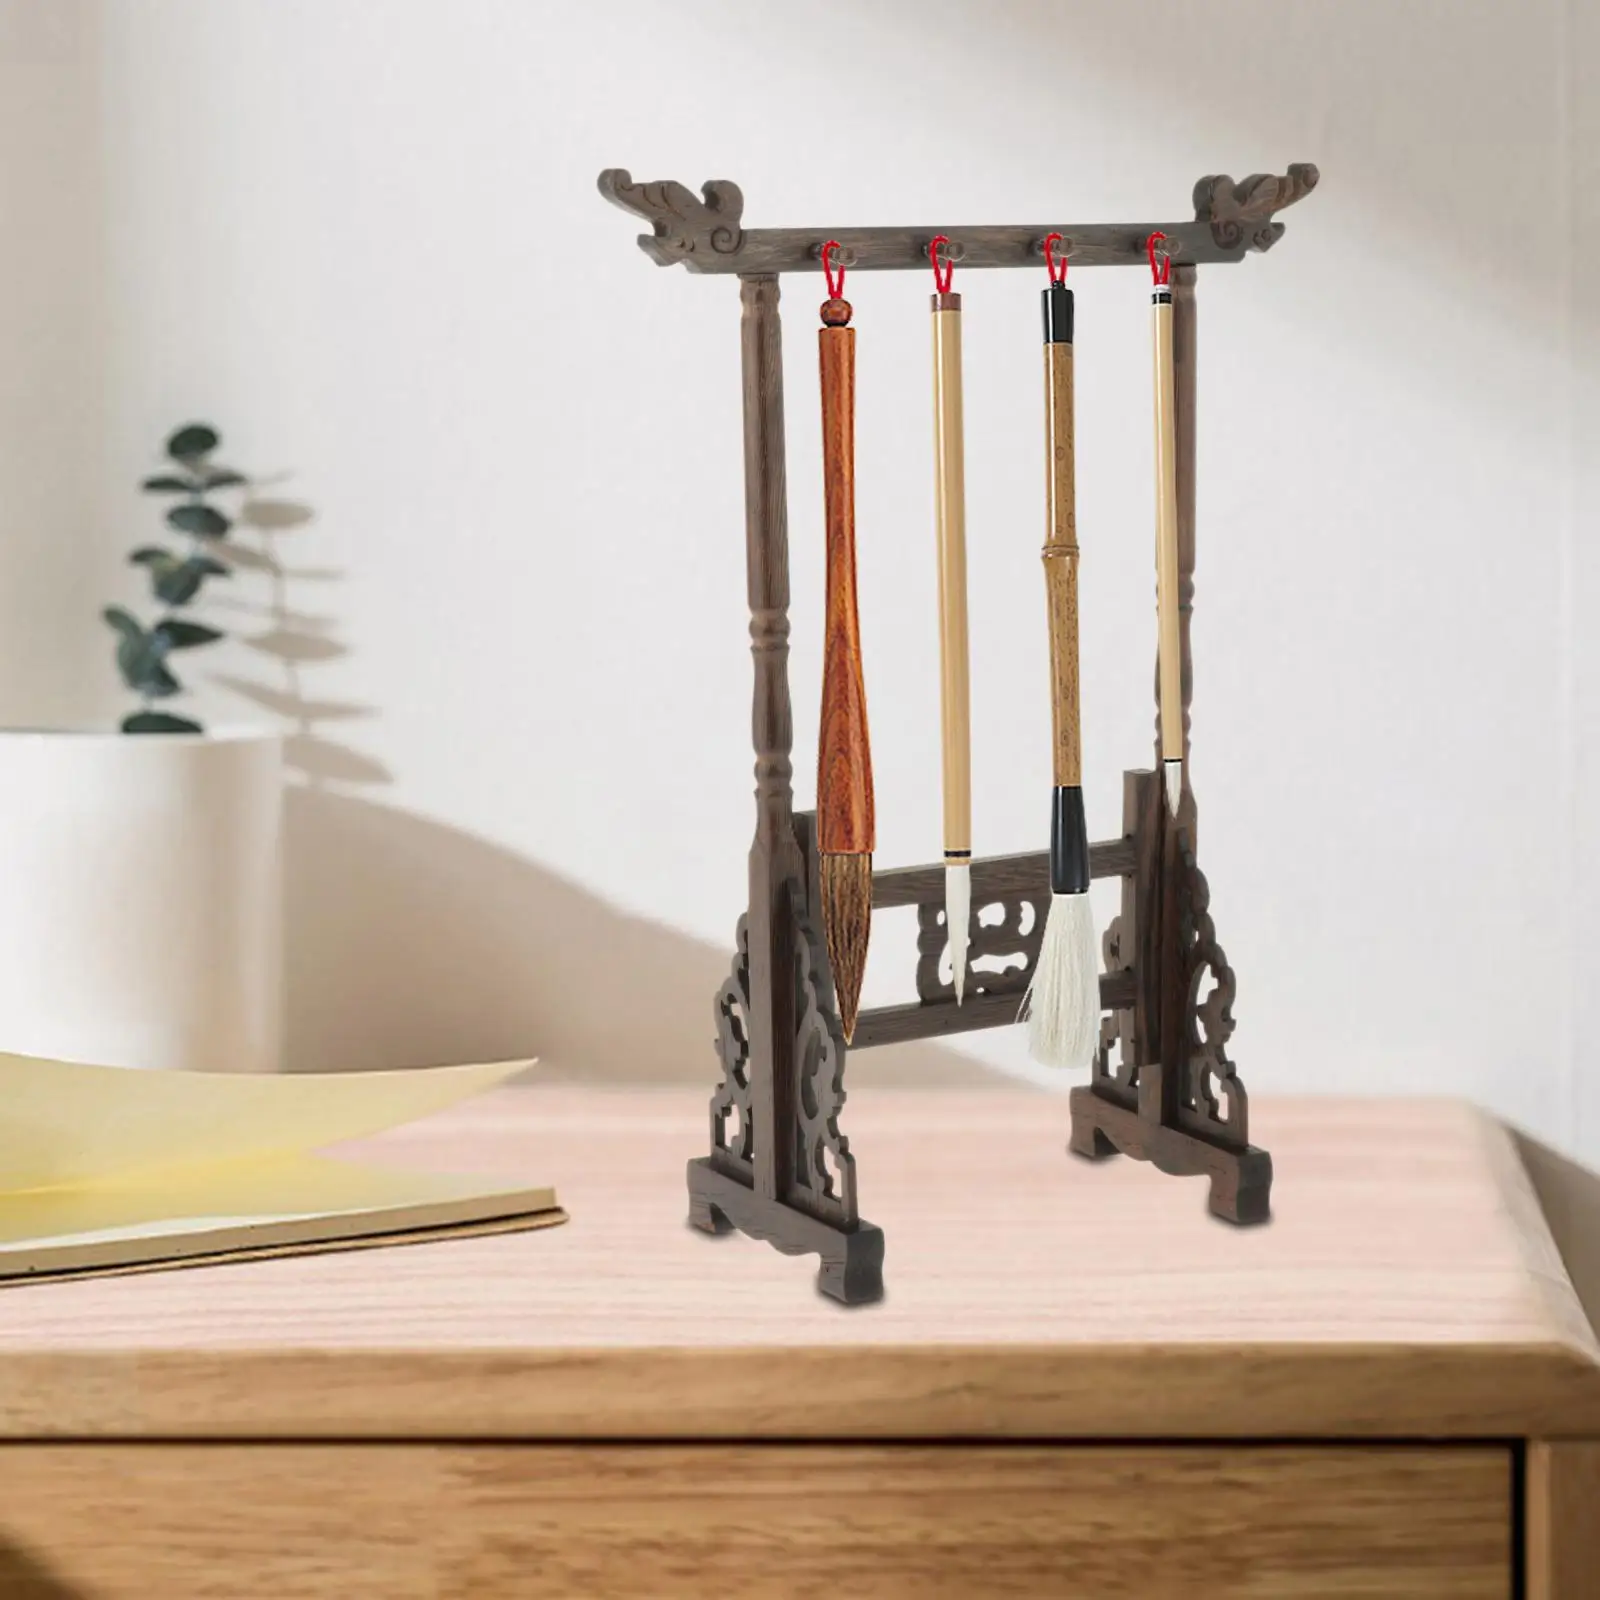 Calligraphy Brush Hanger Stand Wooden Shelf Accessories Assembled Size 17.5Cmx10Cmx37cm Retro Chinese Style Elegant Durable